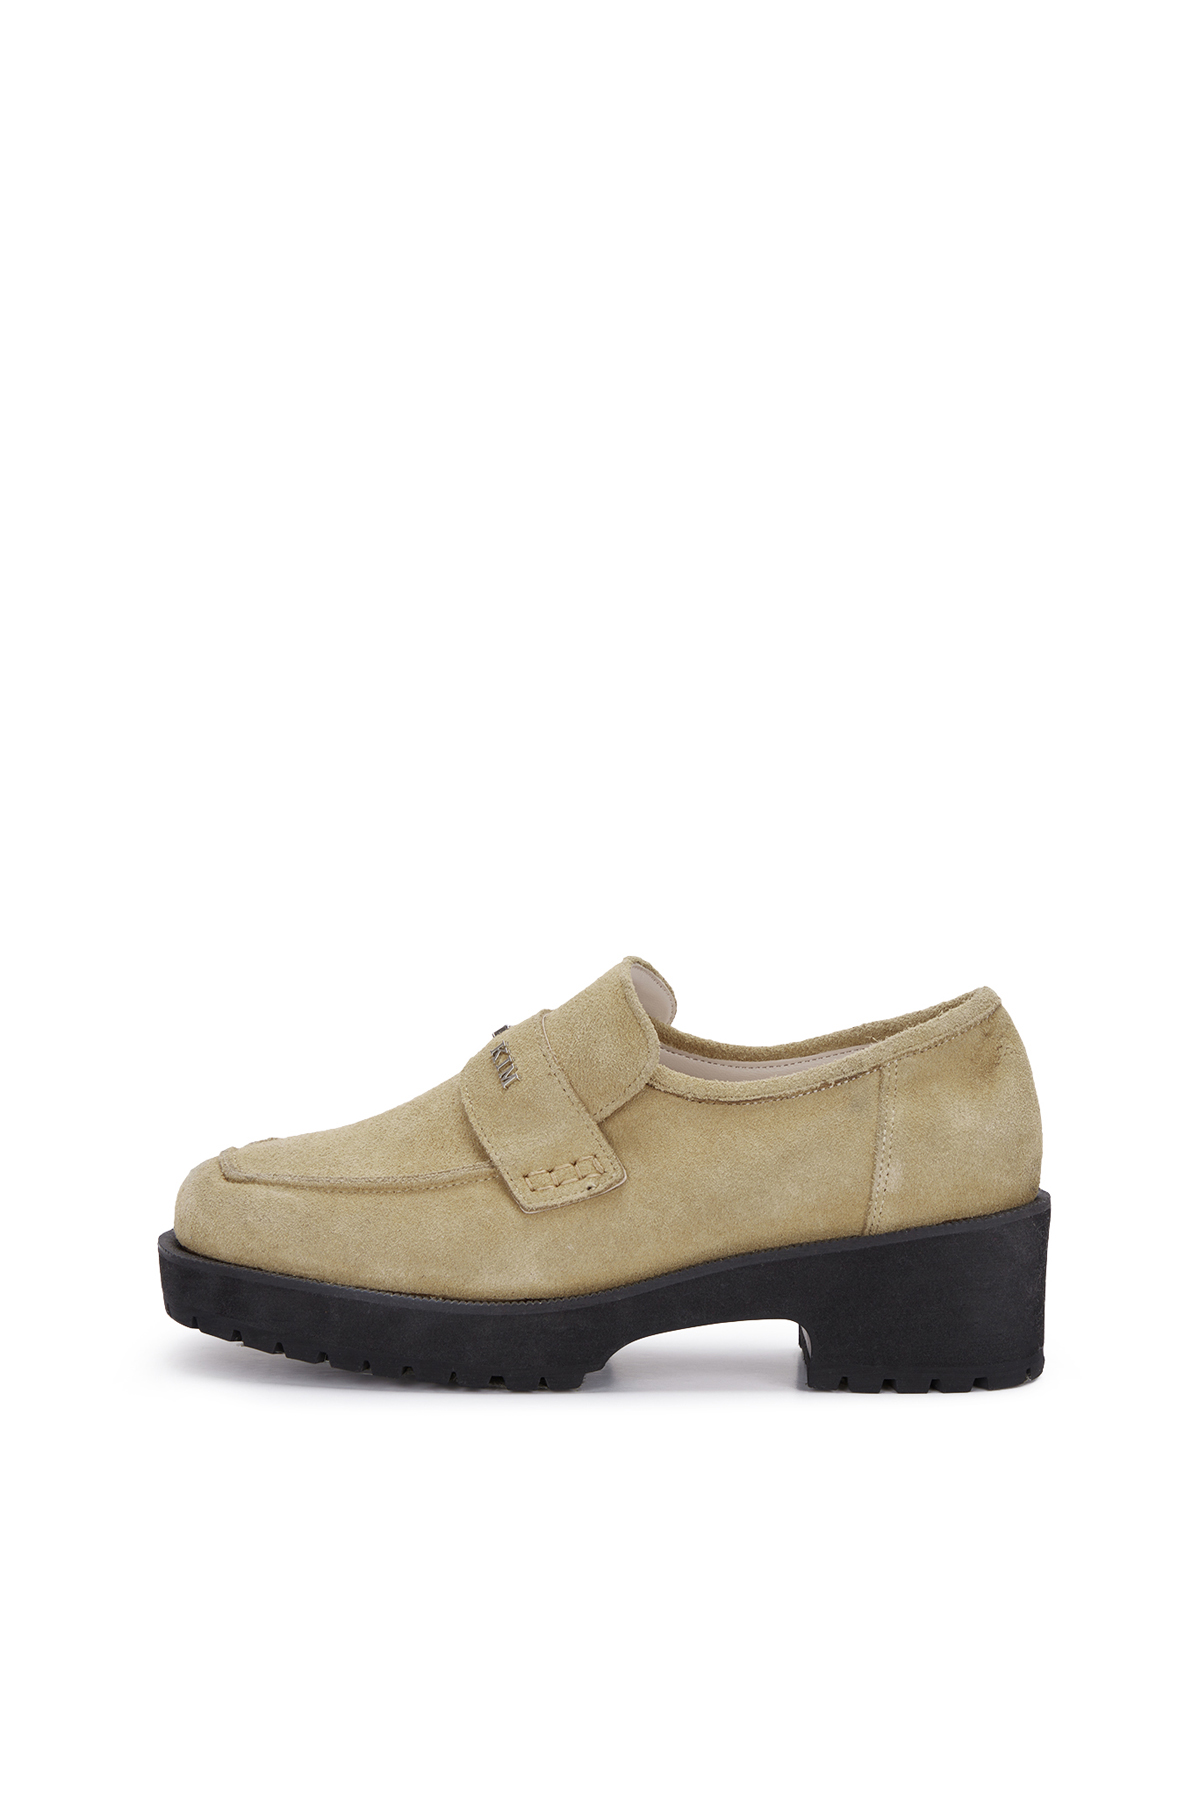 MATIN SQUARE SUEDE LOAFER IN BEIGE